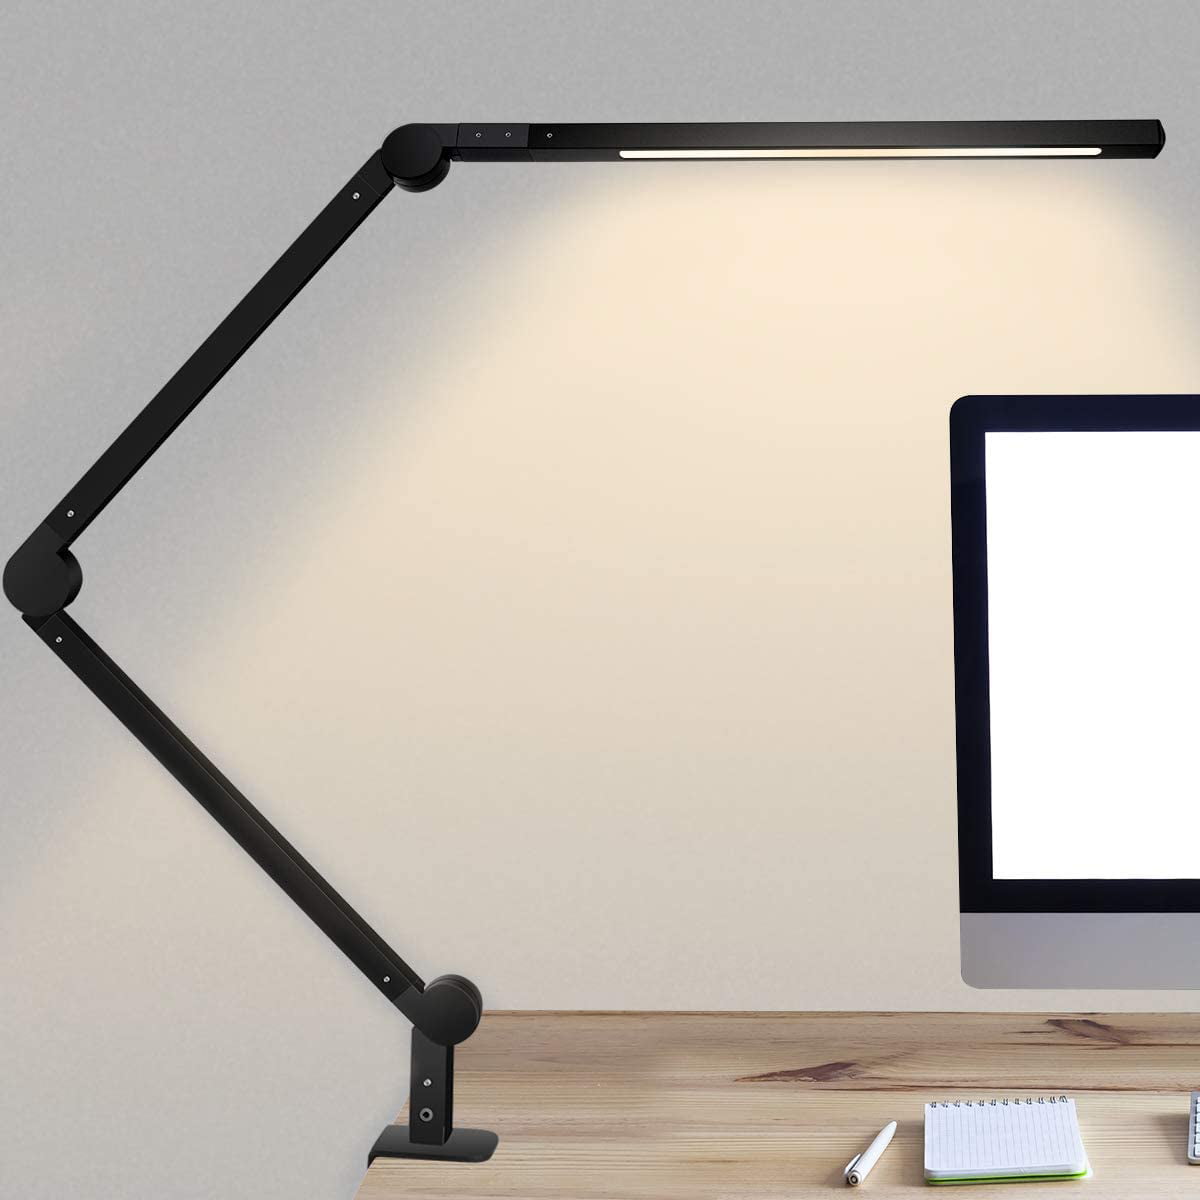 Swing Arm Dimmab Architect with Metal Clamp Table Lamp 56-LED Desk Light